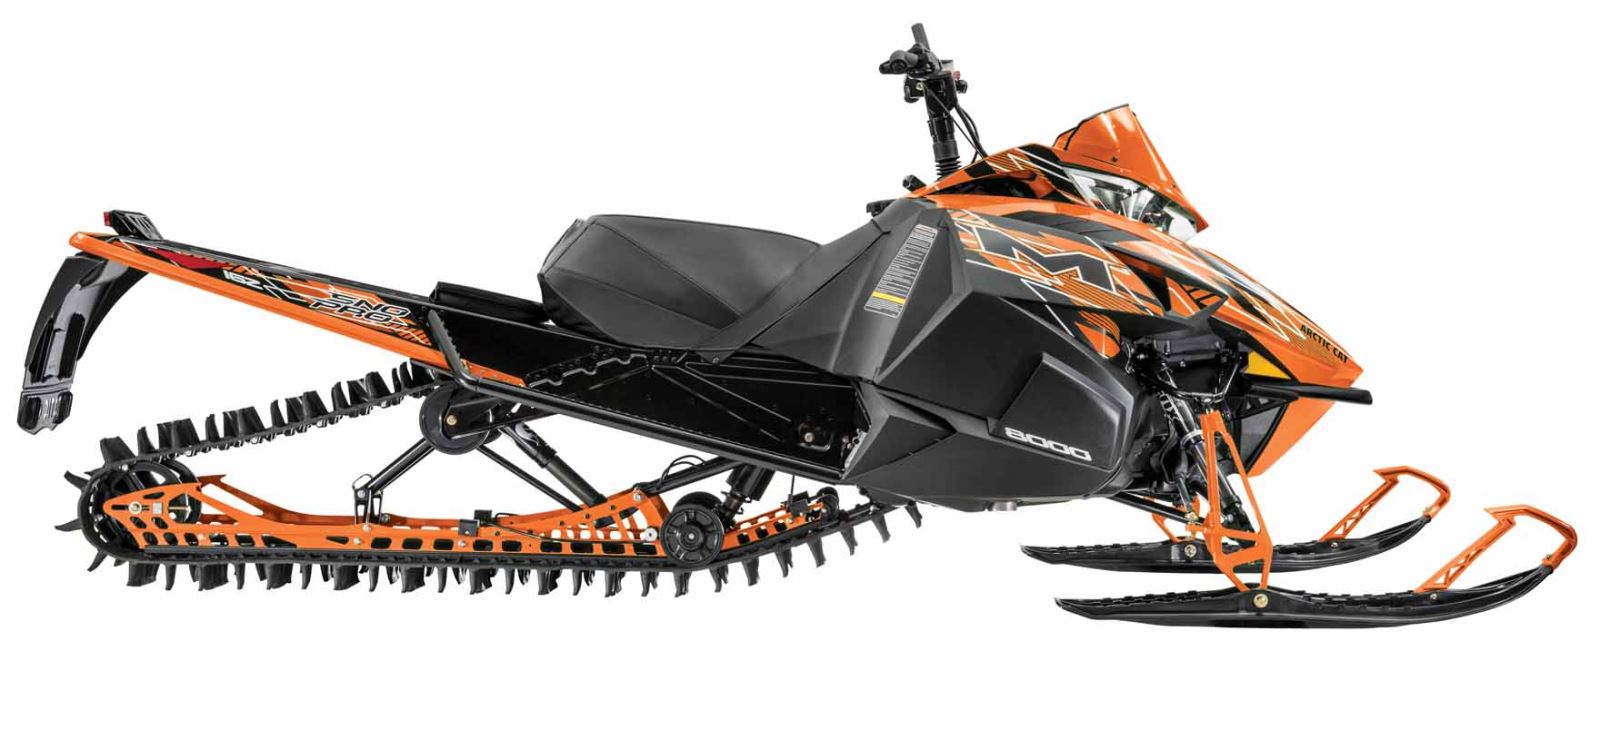 First Look: 2015 Arctic Cat Mountain Snowmobiles | SnoWest